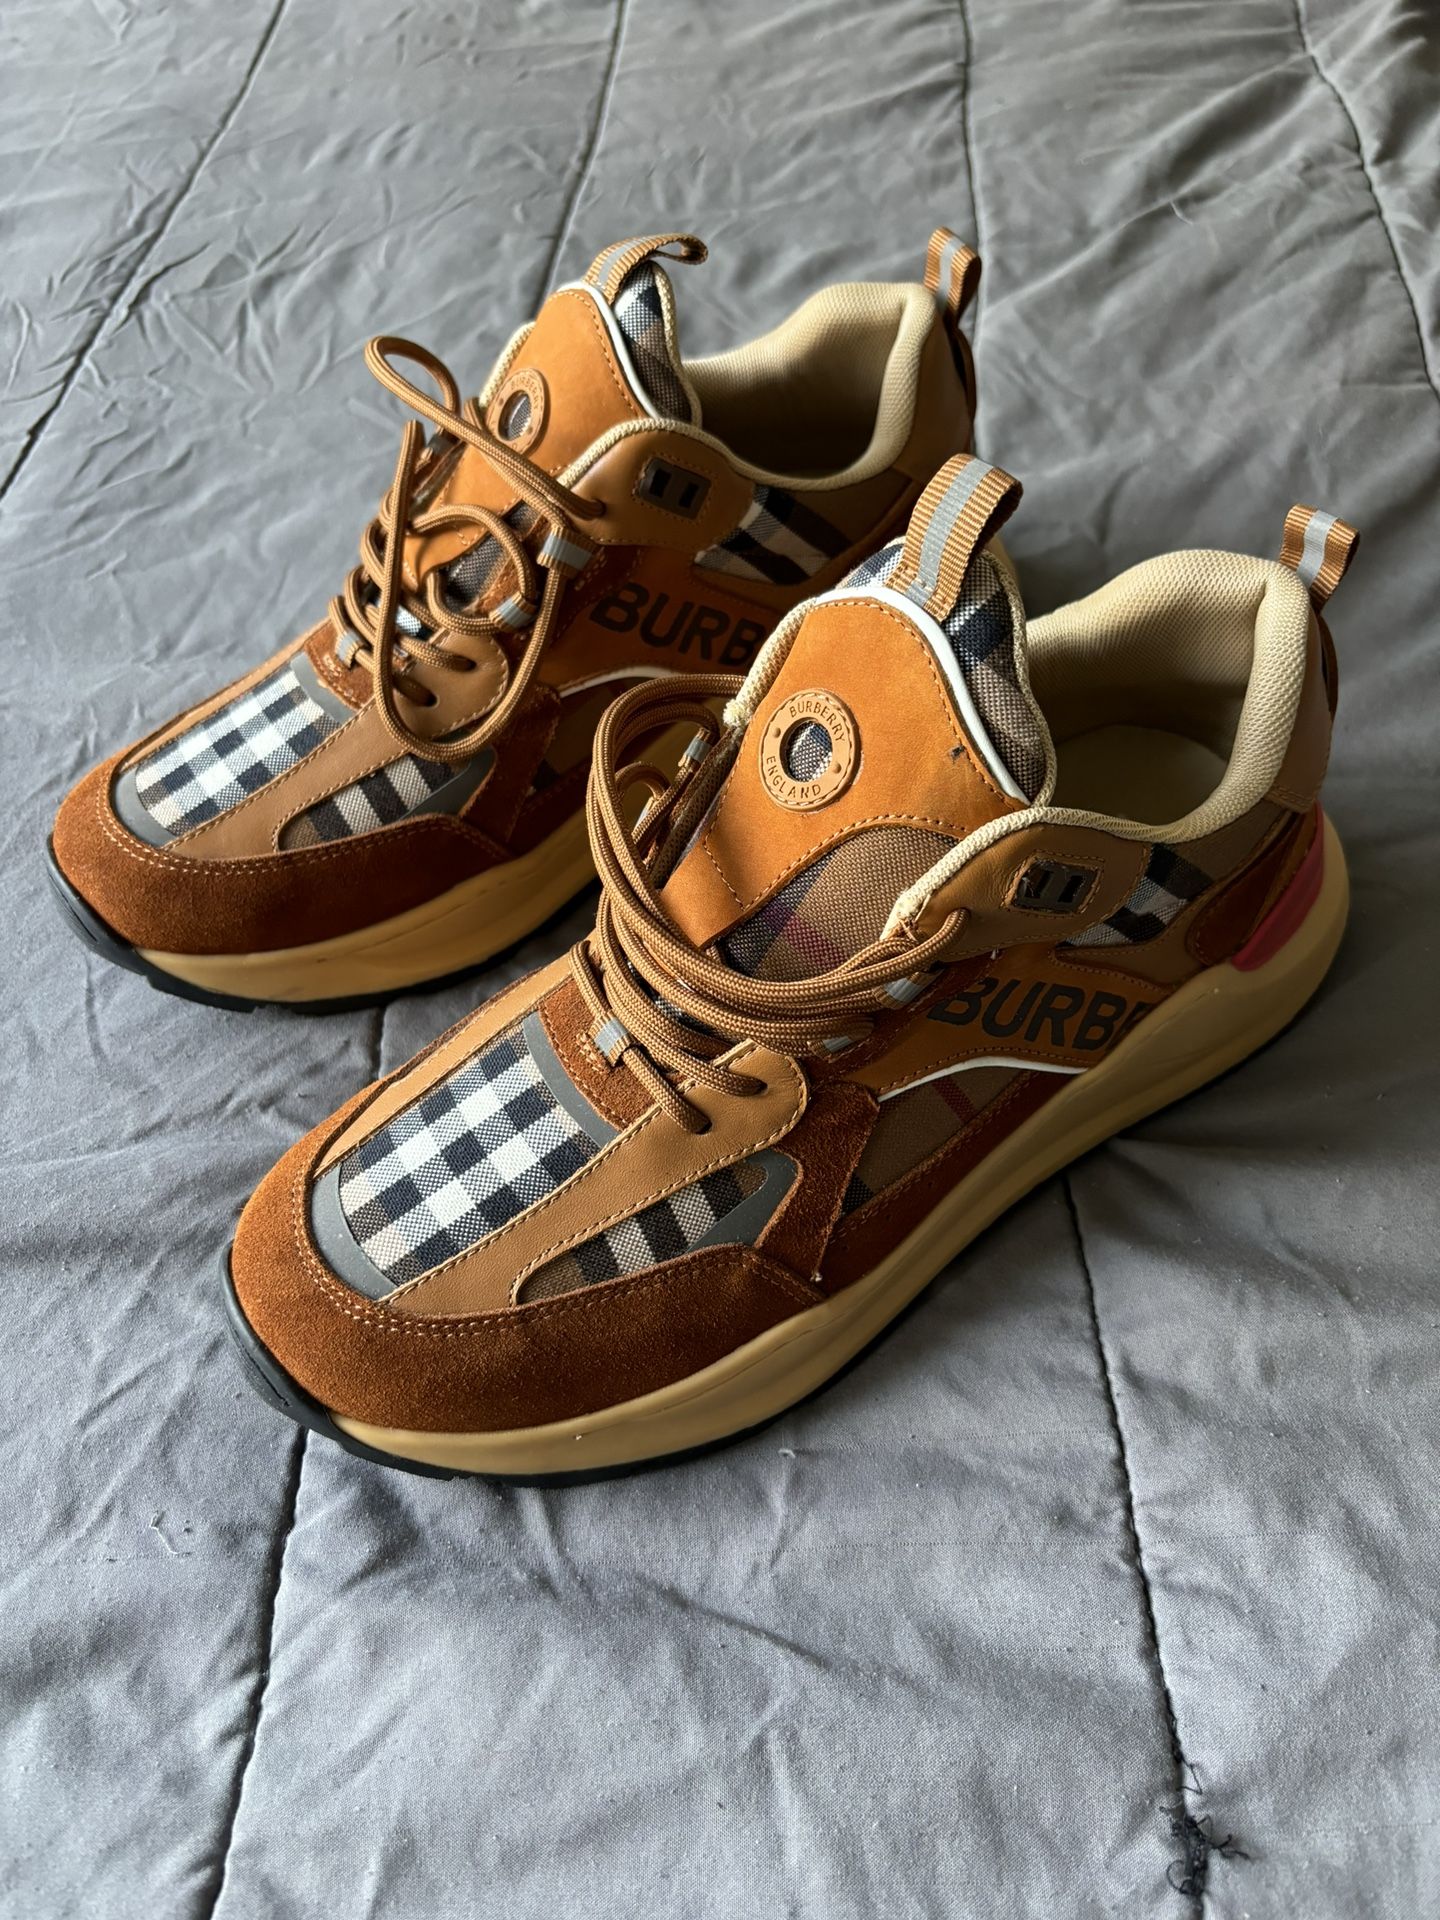 Burberry Sean Size 43 (Shipping Only, Comes With Original Box)